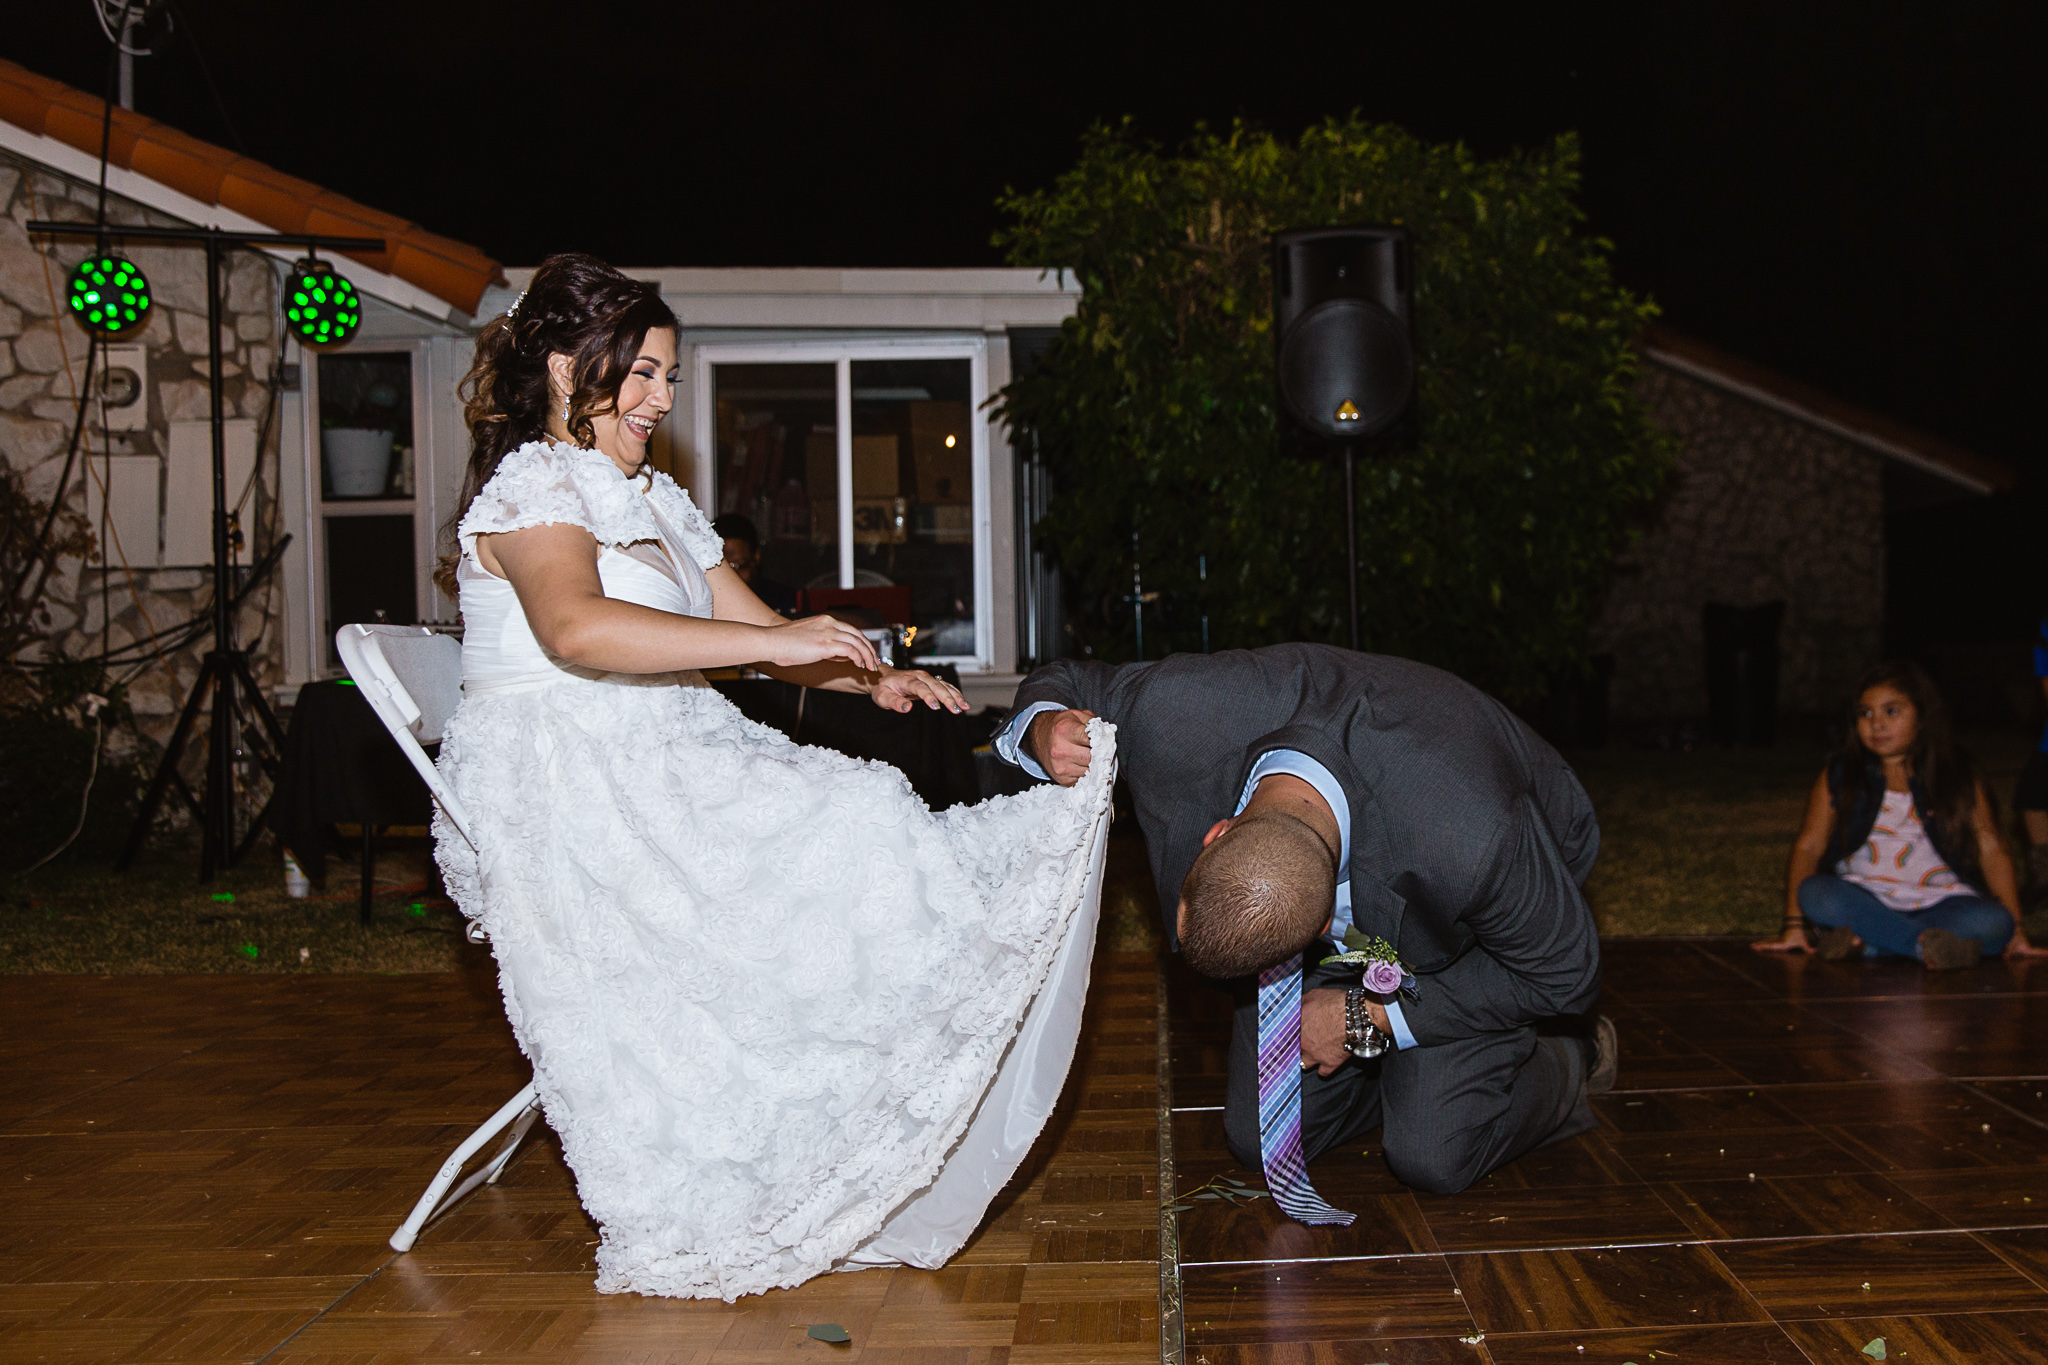 Bride laughs as groom goes under her dress to get the garter by PMA Photography.